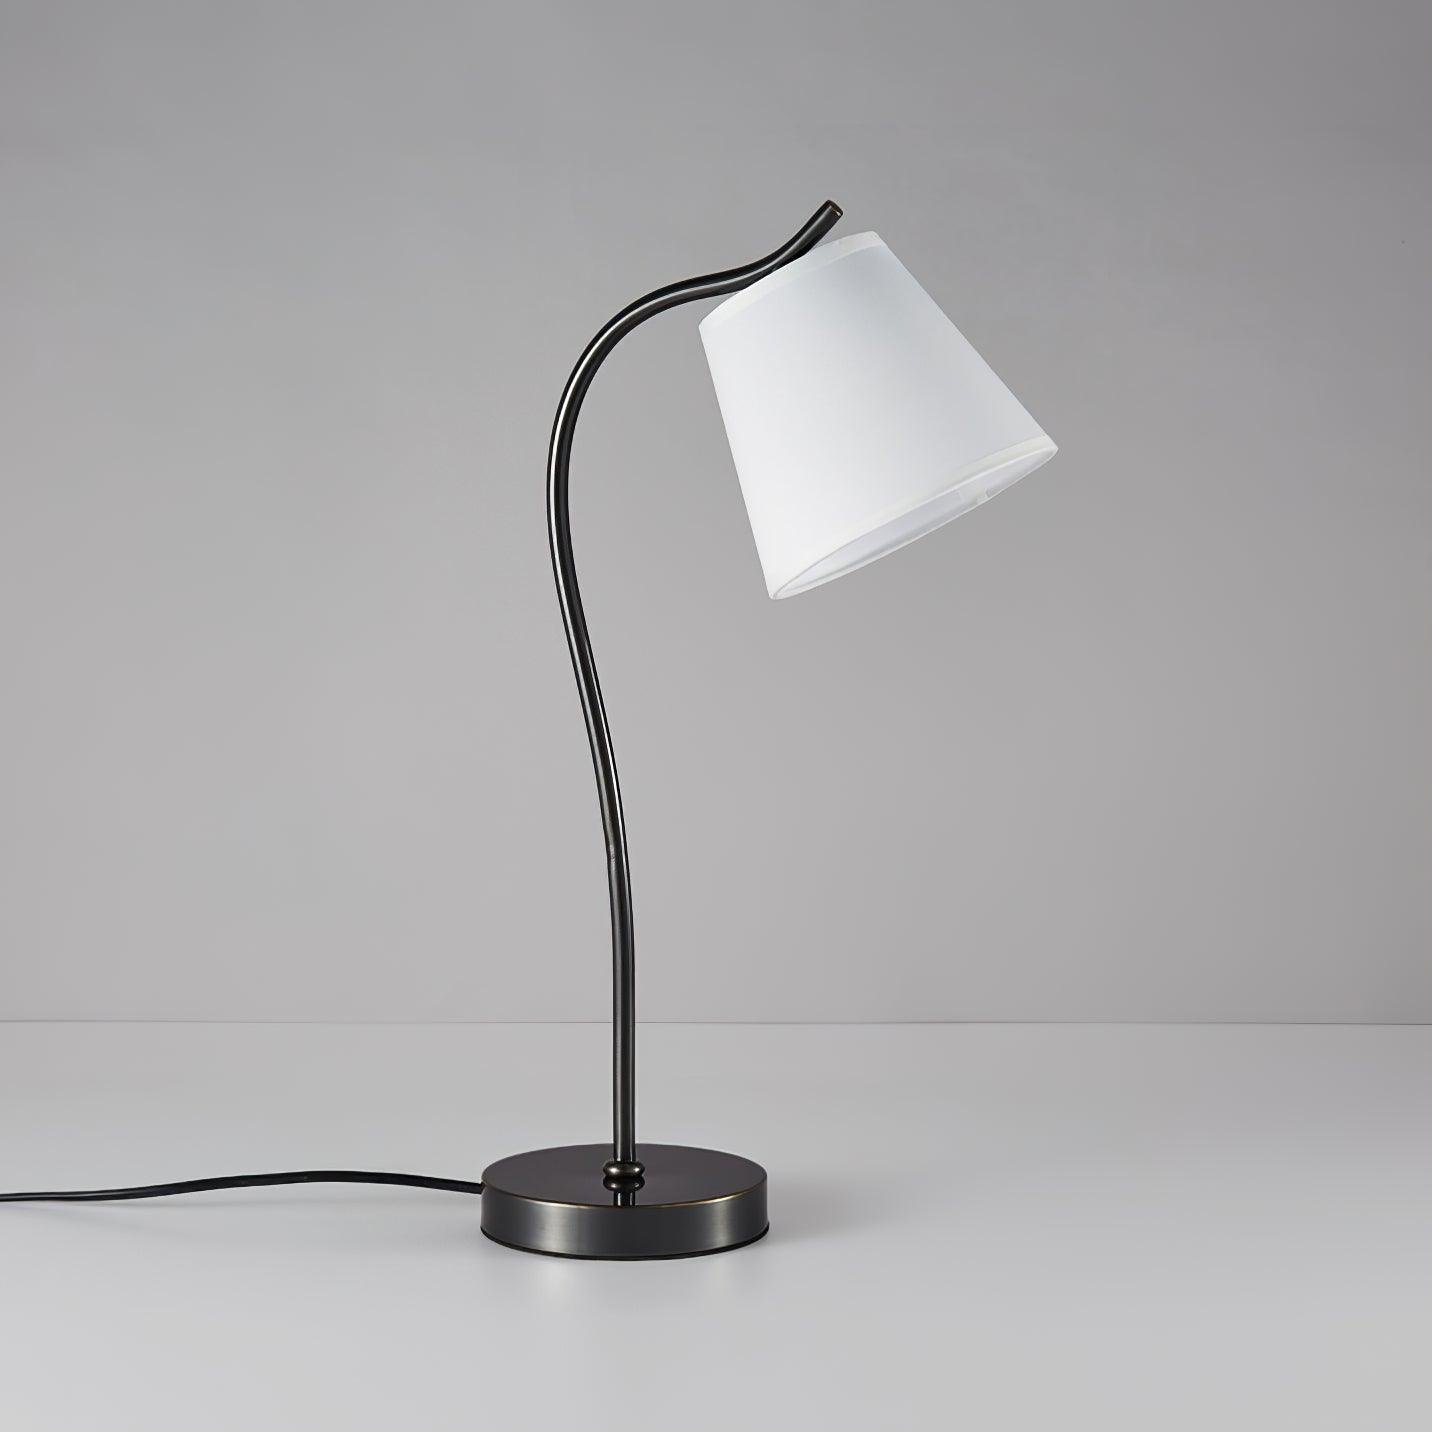 Black and White Jody Table Lamp with EU Plug, measuring 10.6" in diameter and 25.2" in height (27cm x 64cm)